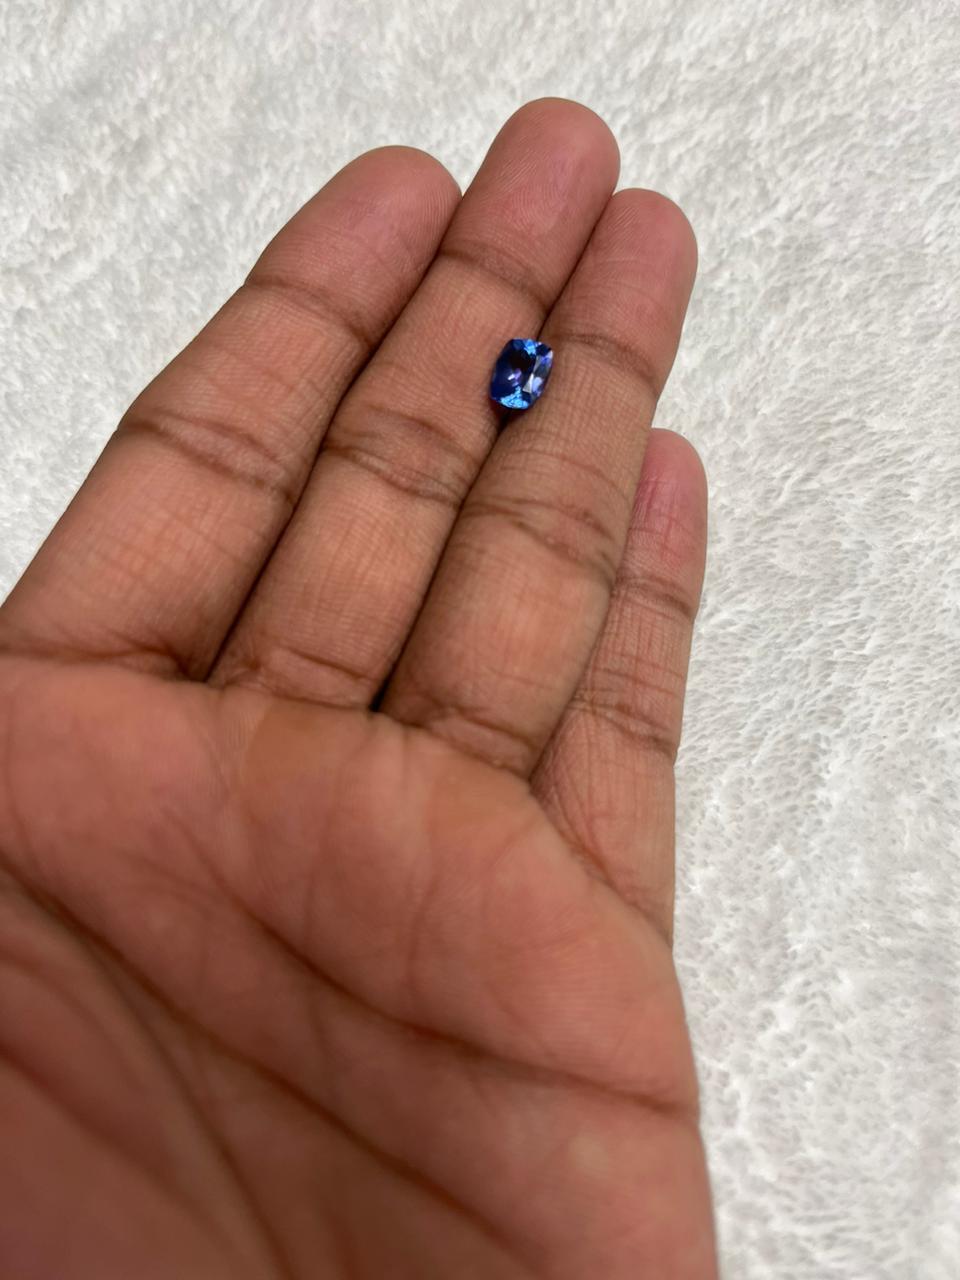 SKU - 
Size - 8x6mm
Shape - cushion
Grade - AAA
Weight - 1.52
Price - $290

AAA Tanzanite is one of the rarest gemstones in the world. Get this beautiful gem to grace your collection with charm and shine. Tanzanite displays intense colour play. The